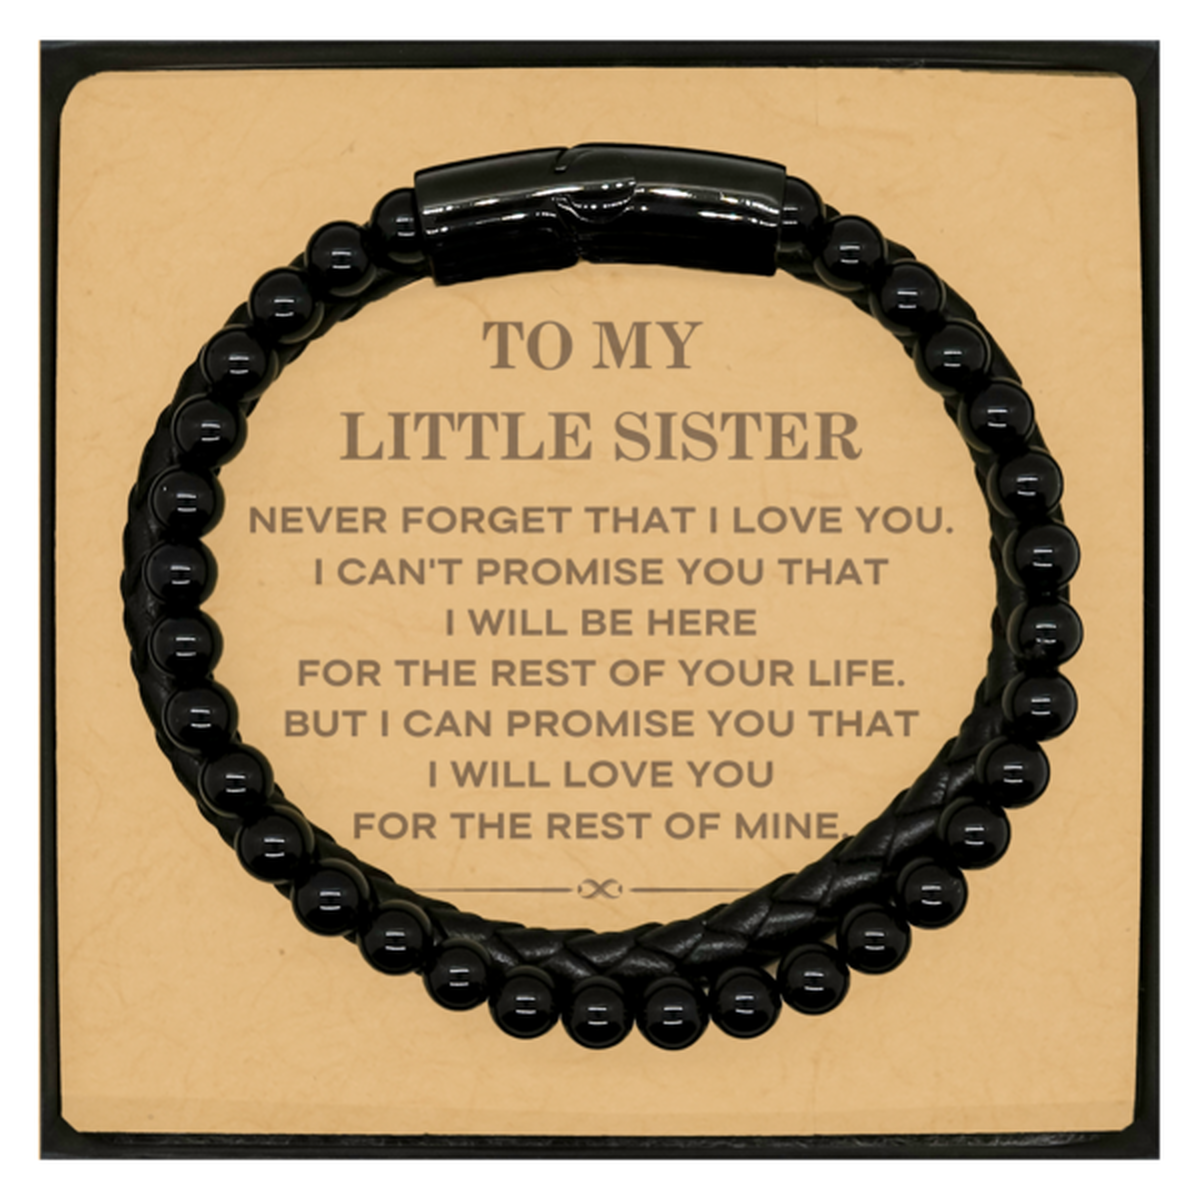 To My Little Sister Gifts, I will love you for the rest of mine, Love Little Sister Bracelet, Birthday Christmas Unique Stone Leather Bracelets For Little Sister